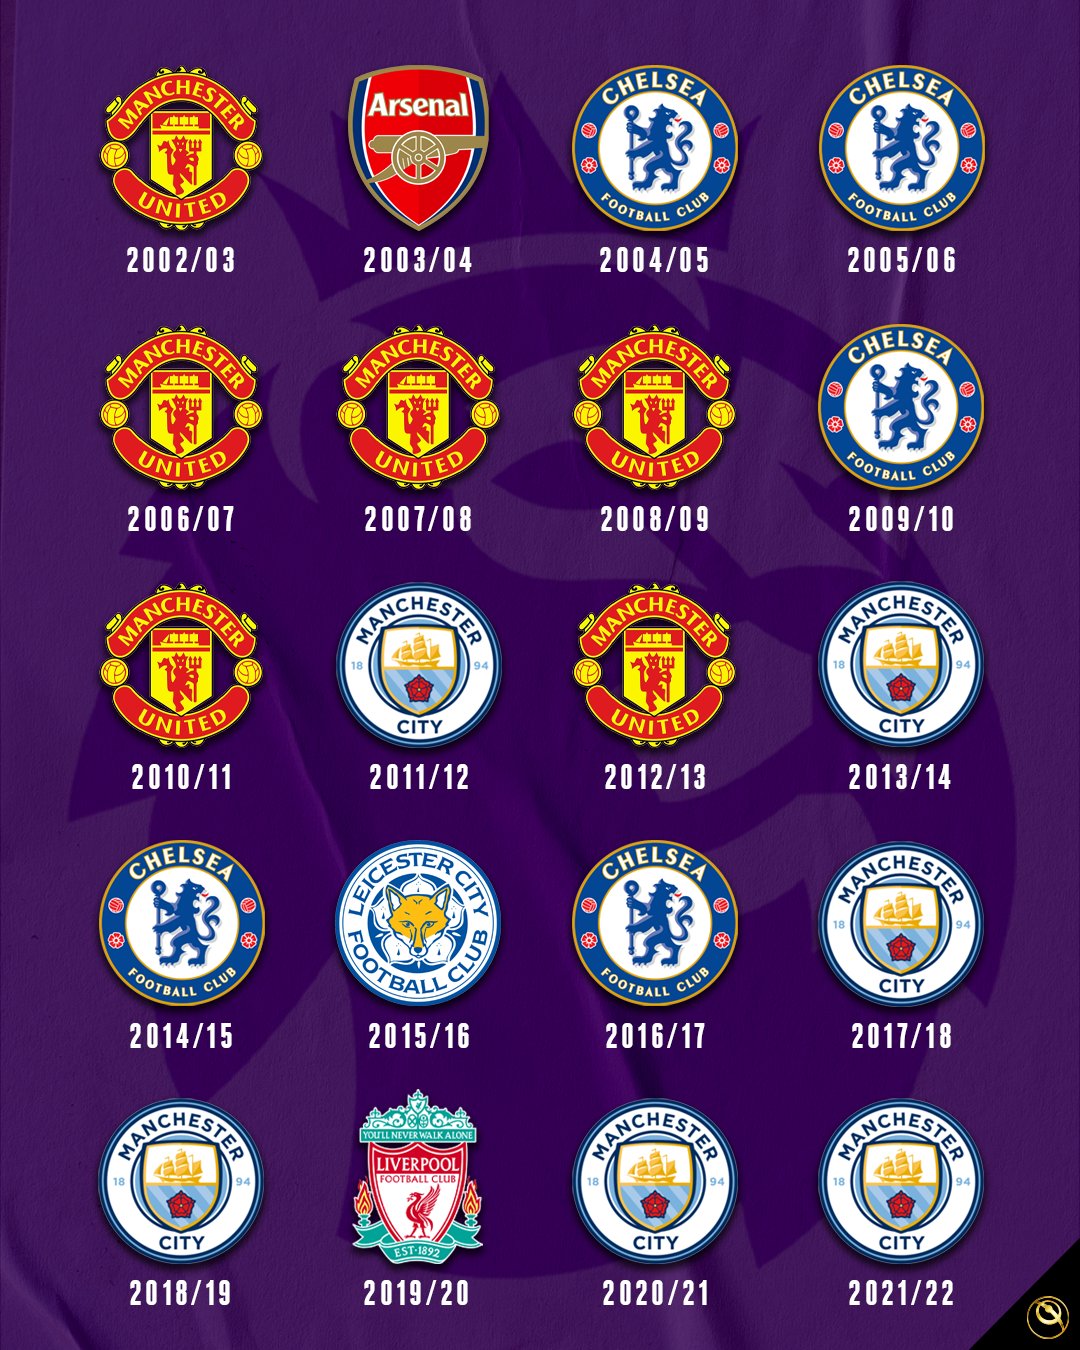 Globe Soccer Awards on Twitter: "The winners of Premier League over the past two decades 🏴󠁧󠁢󠁥󠁮󠁧󠁿🏆 Can you see your club? /